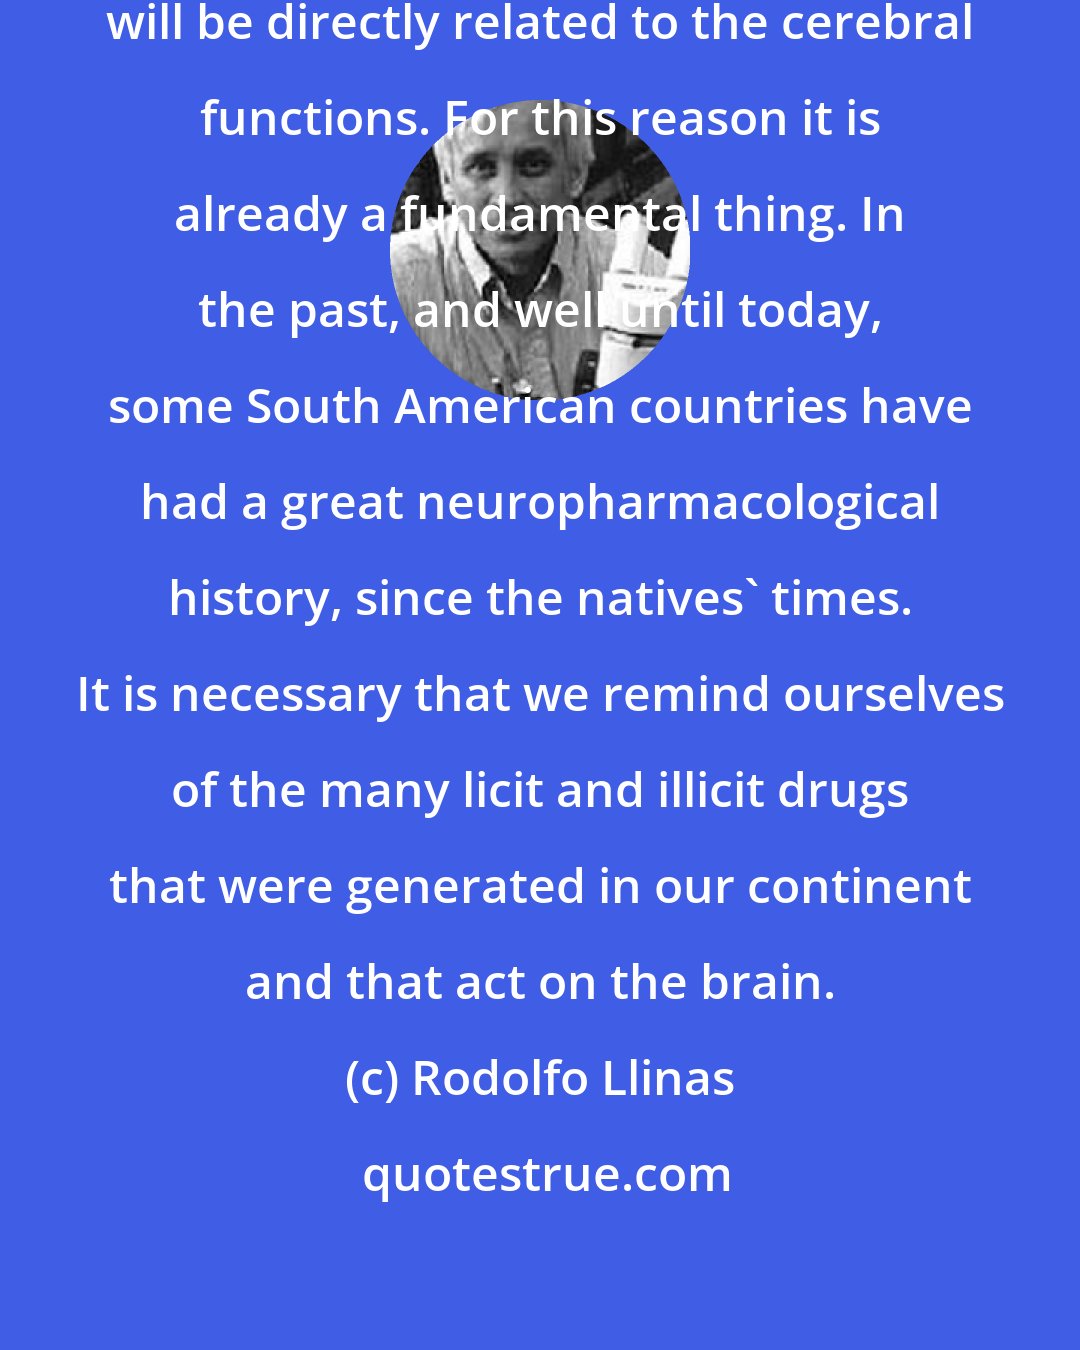 Rodolfo Llinas: The future of human relationships will be directly related to the cerebral functions. For this reason it is already a fundamental thing. In the past, and well until today, some South American countries have had a great neuropharmacological history, since the natives' times. It is necessary that we remind ourselves of the many licit and illicit drugs that were generated in our continent and that act on the brain.